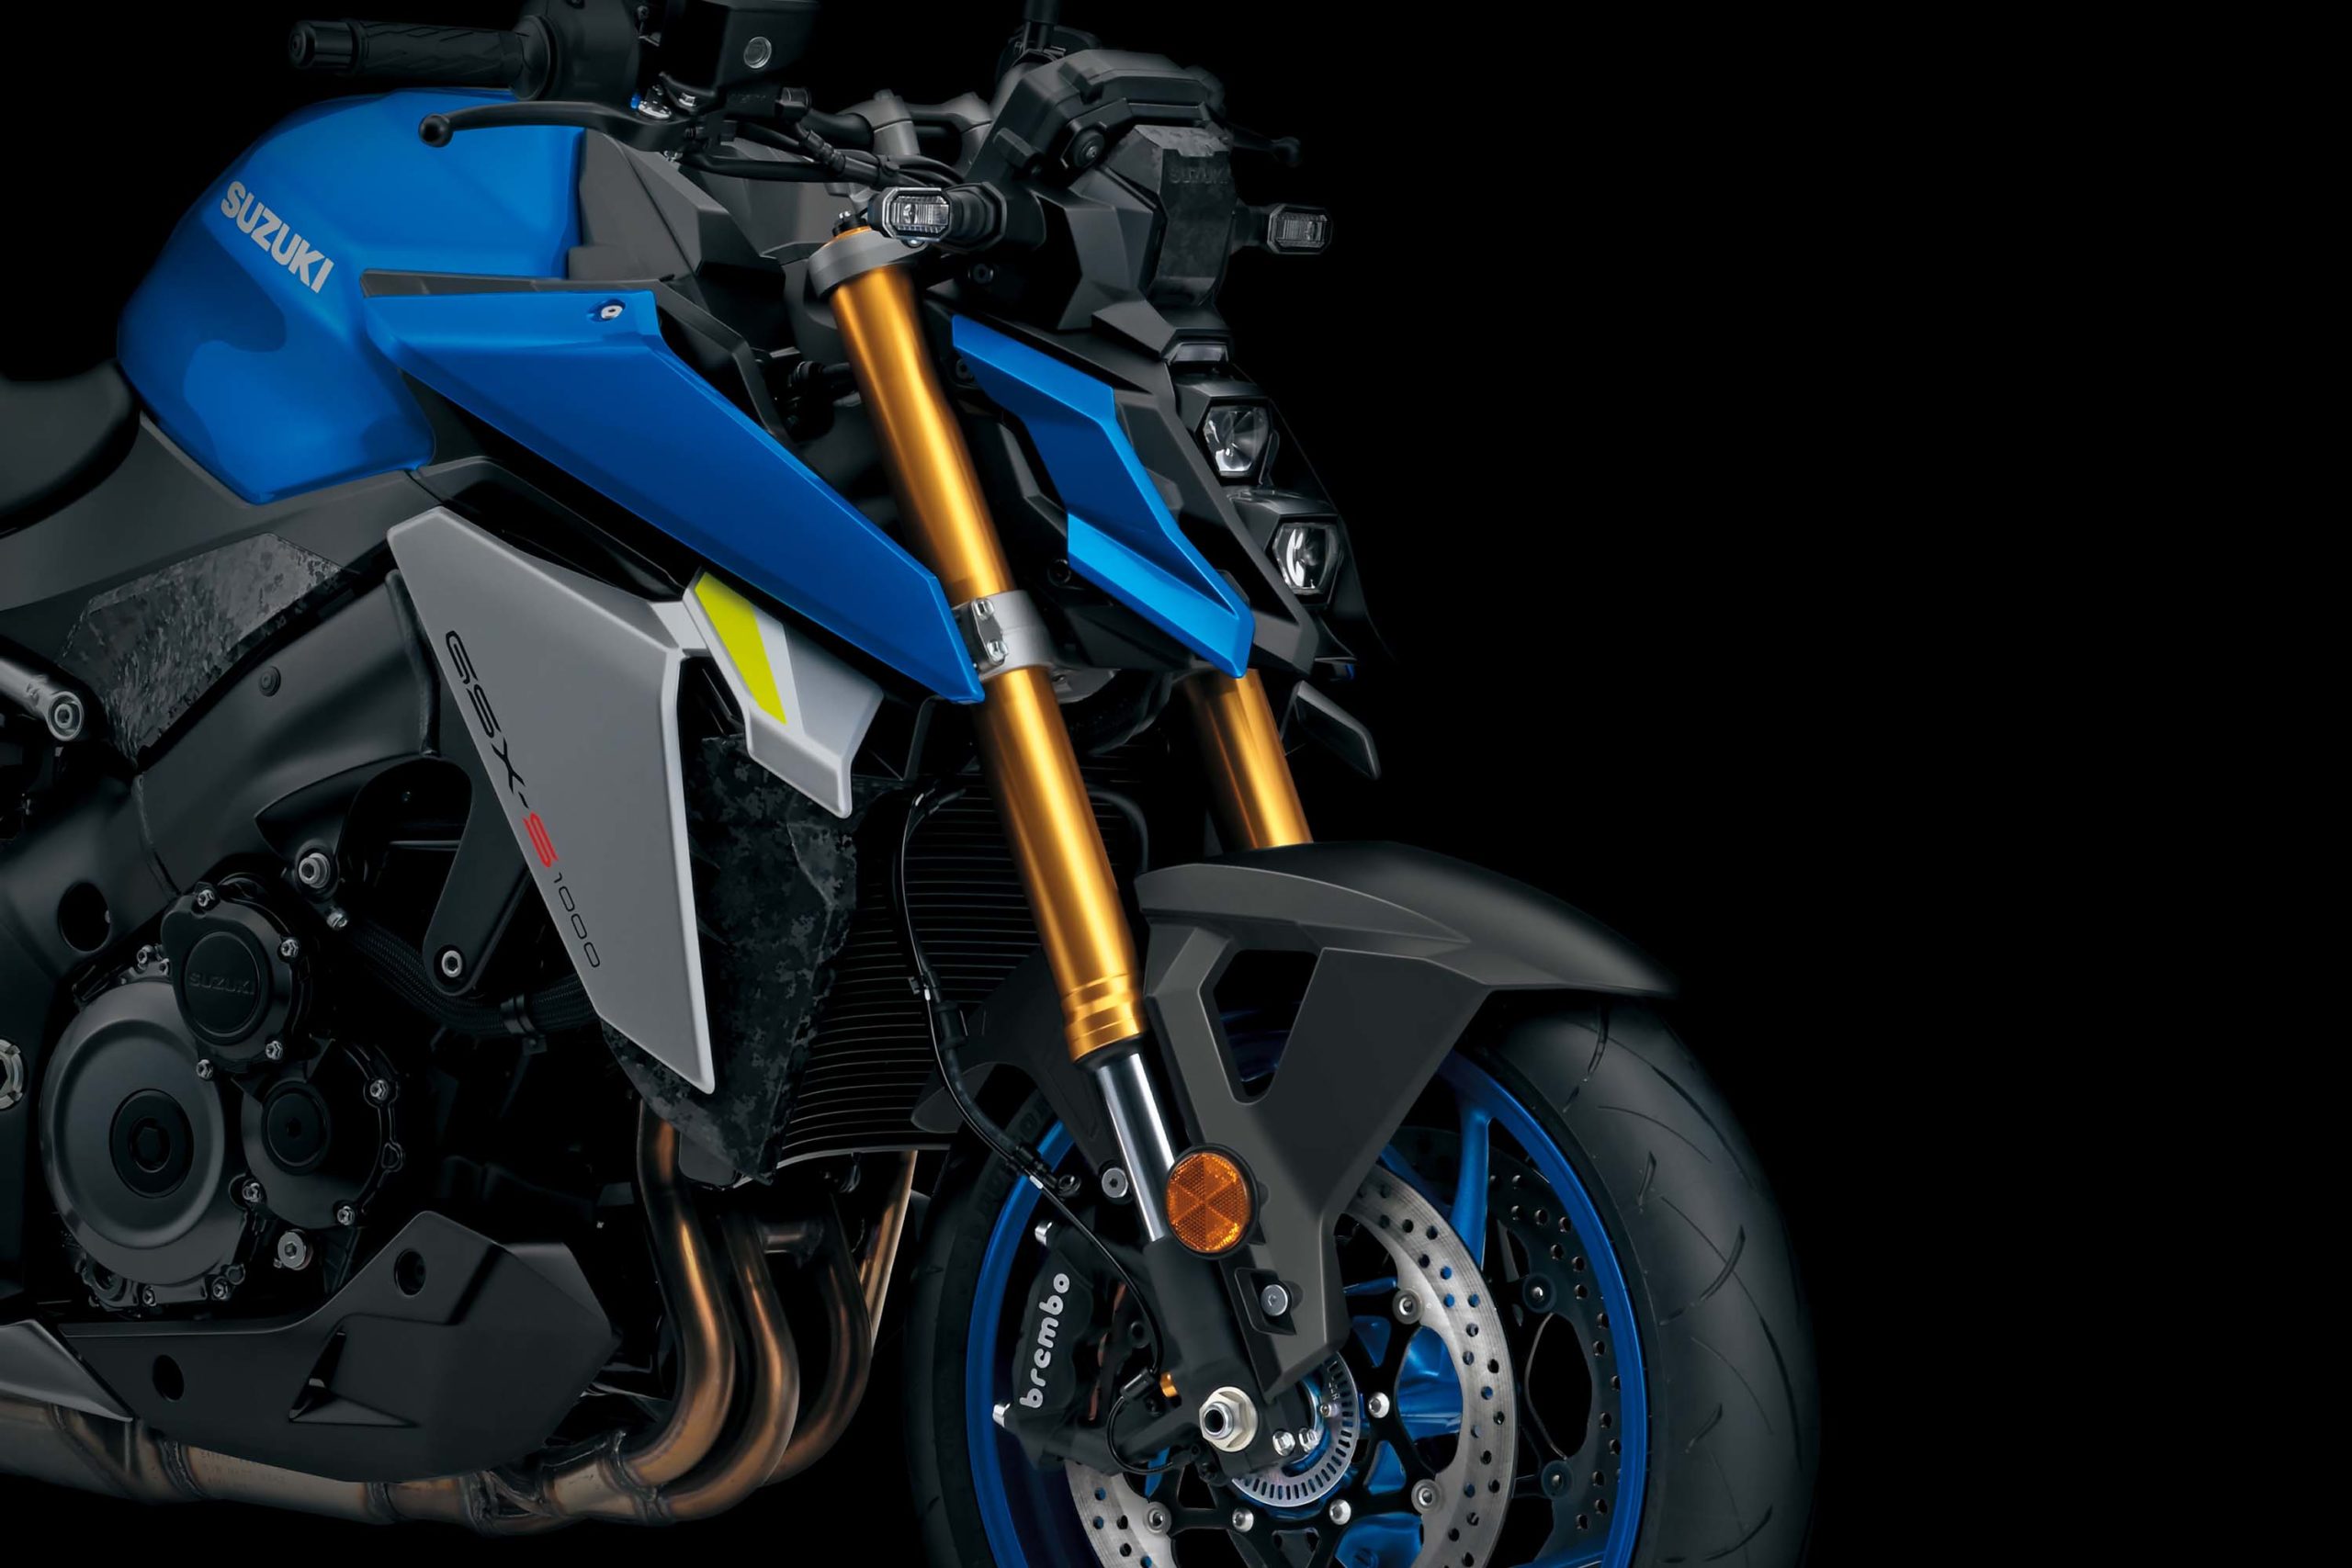 Suzuki Gsx S1000 Gets A New Look And More Value For 2022 Asphalt And Rubber